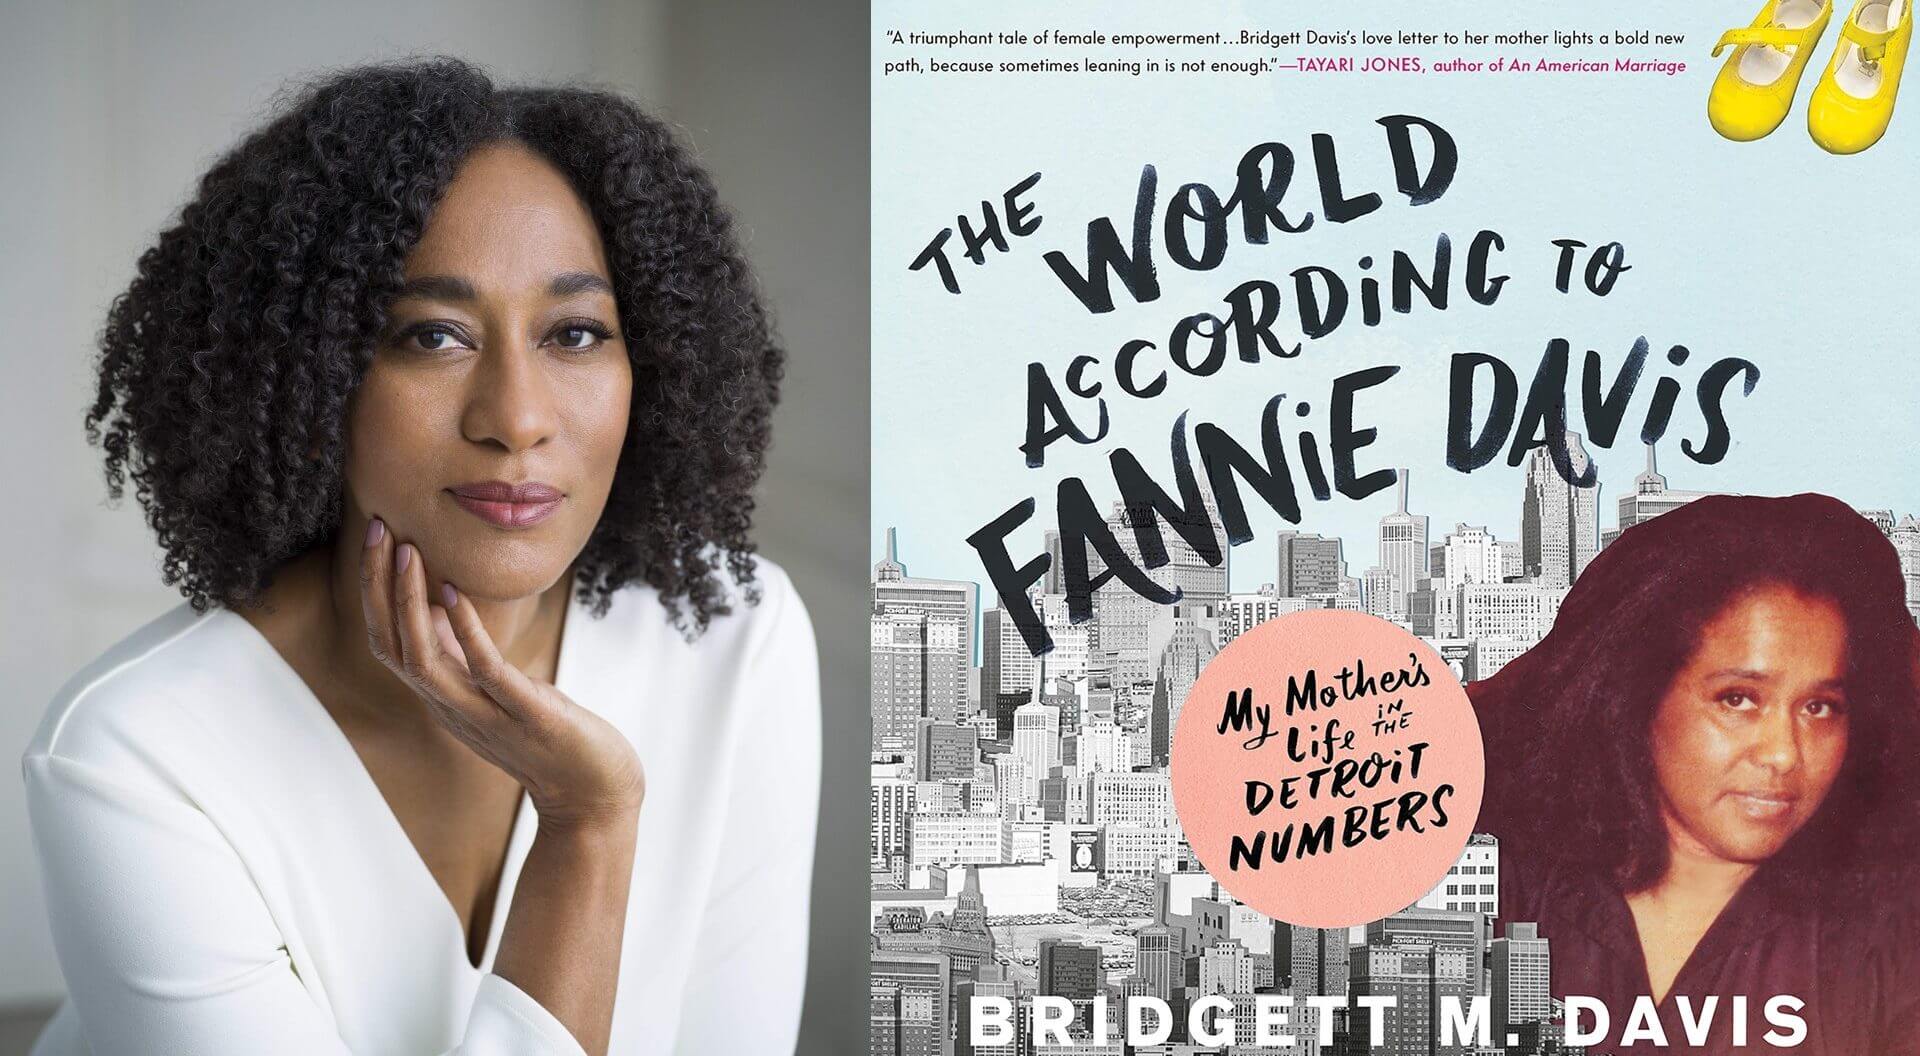 Middle-Class Memoir ‘The World According To Fannie Davis’ To Be Adapted By Searchlight Pictures